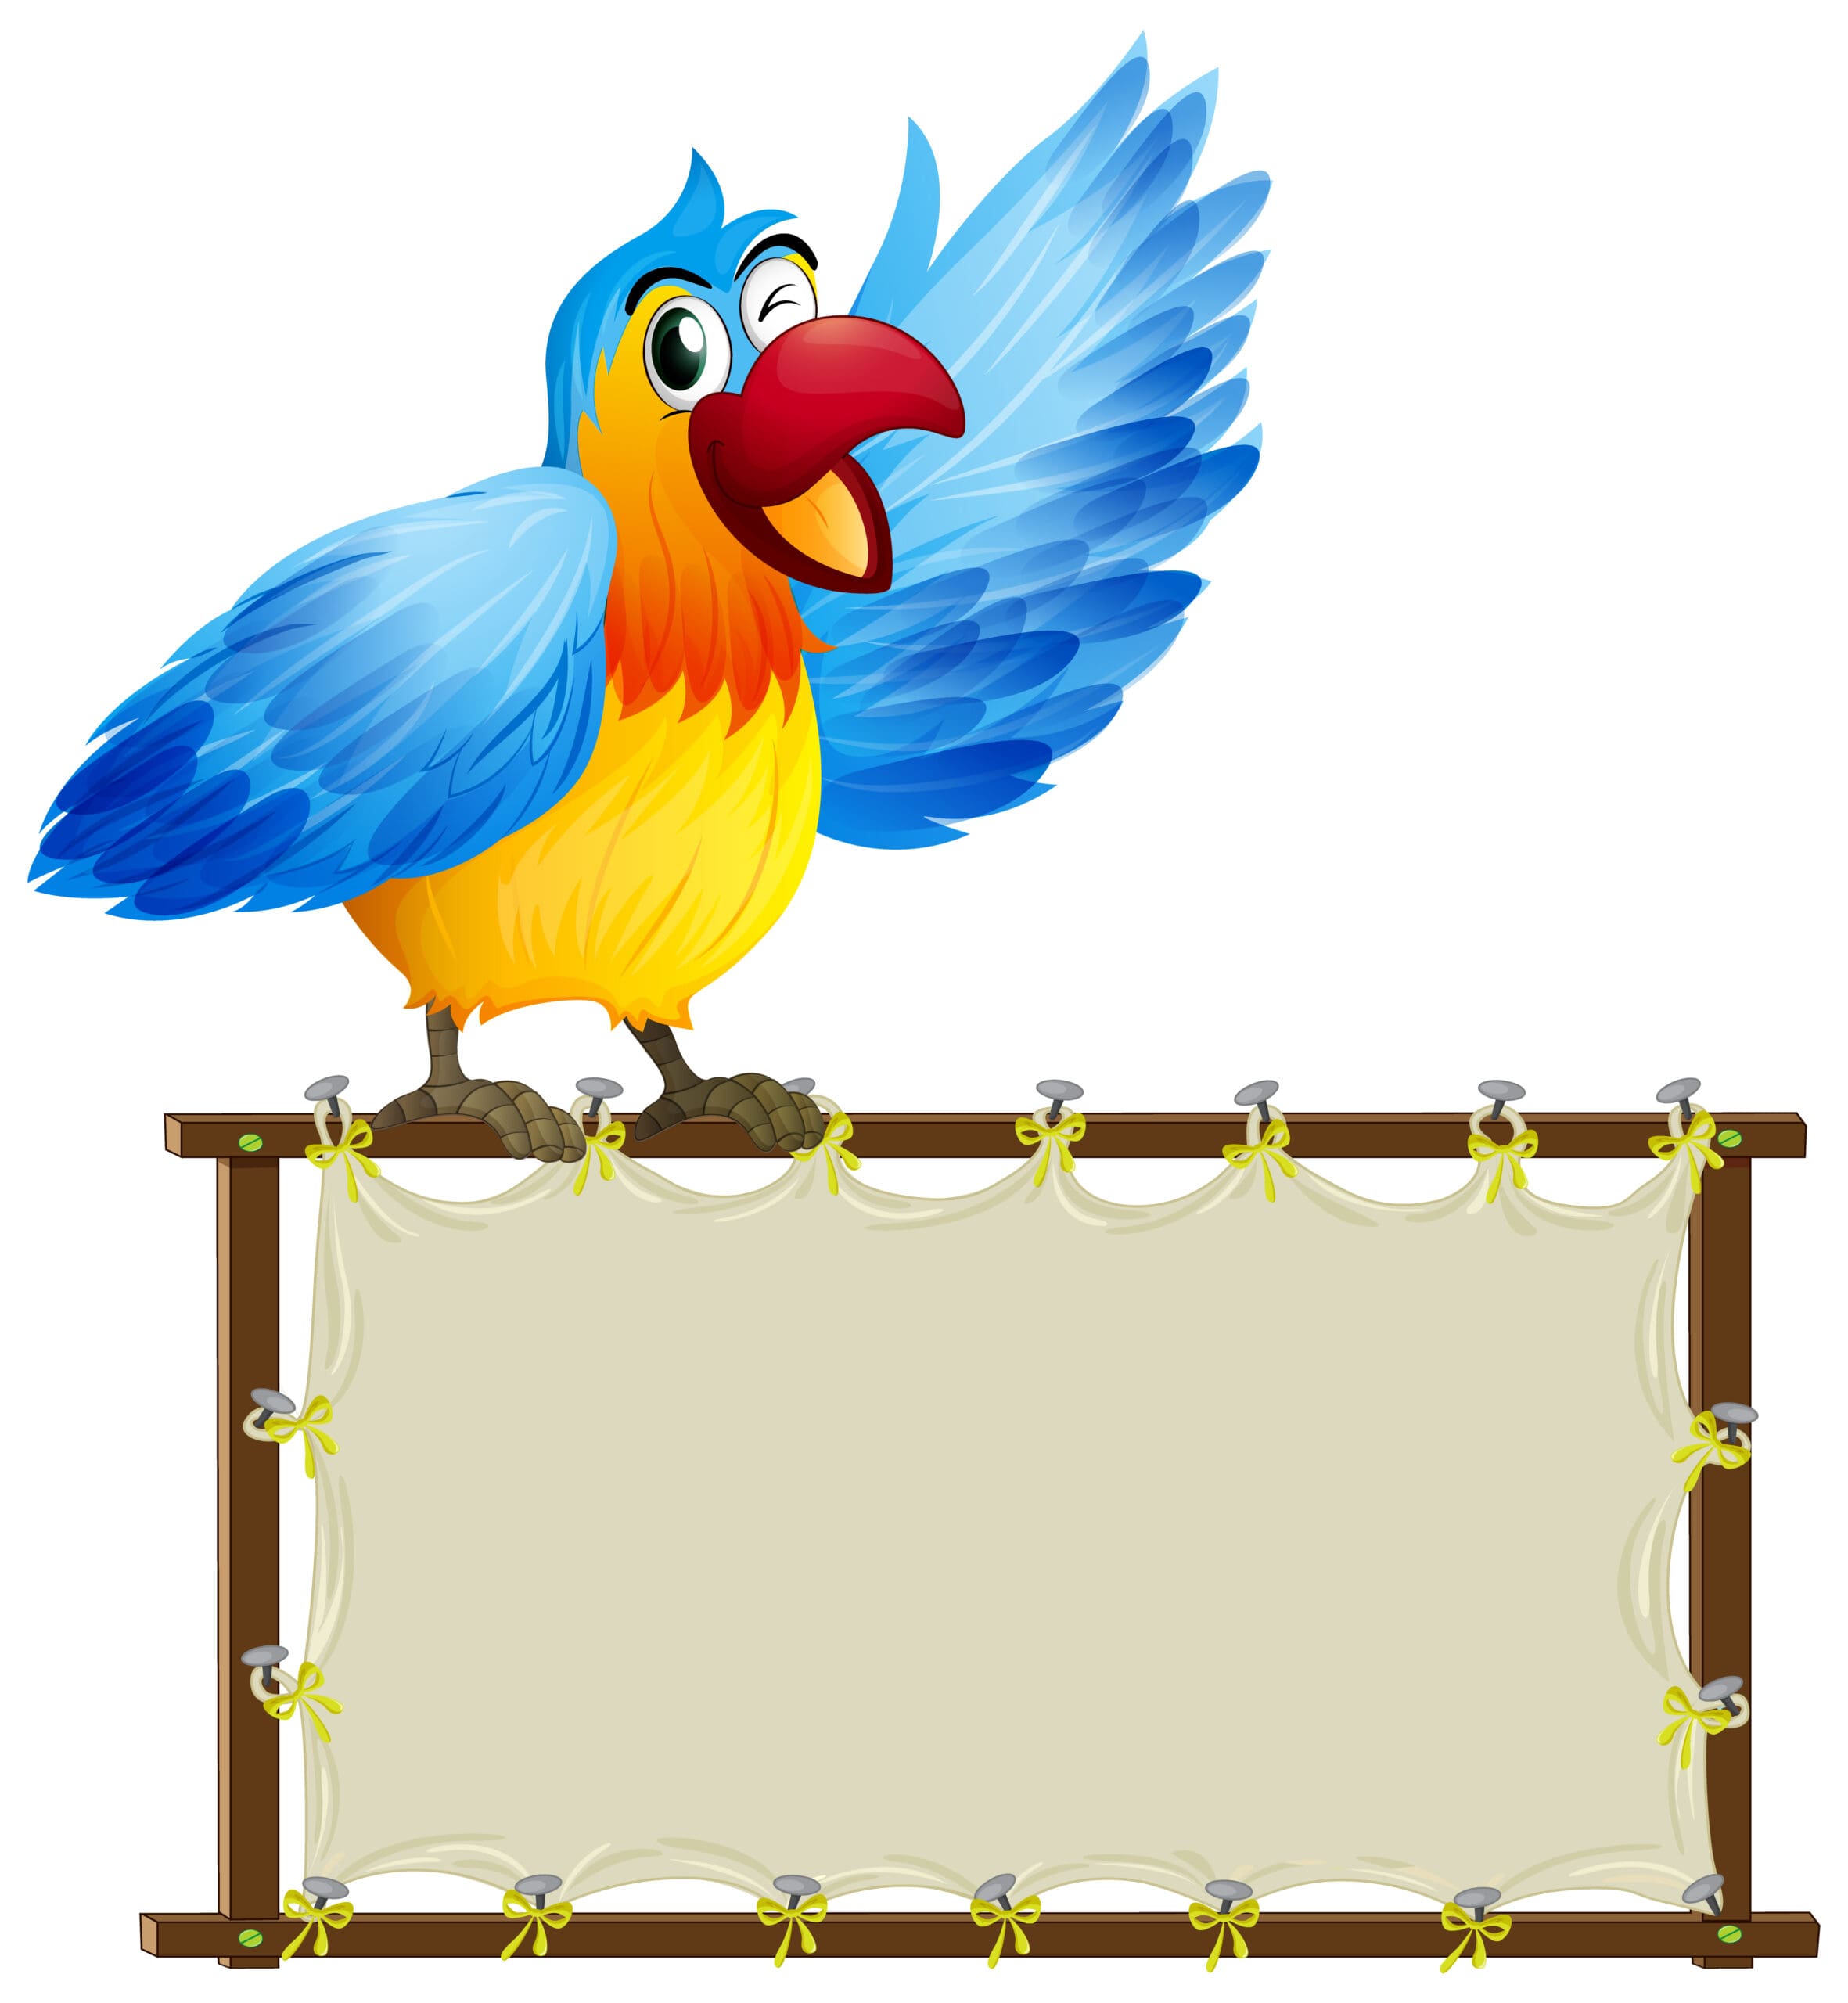 Cartoon graphic of a cheerful parrot perched on a branch.